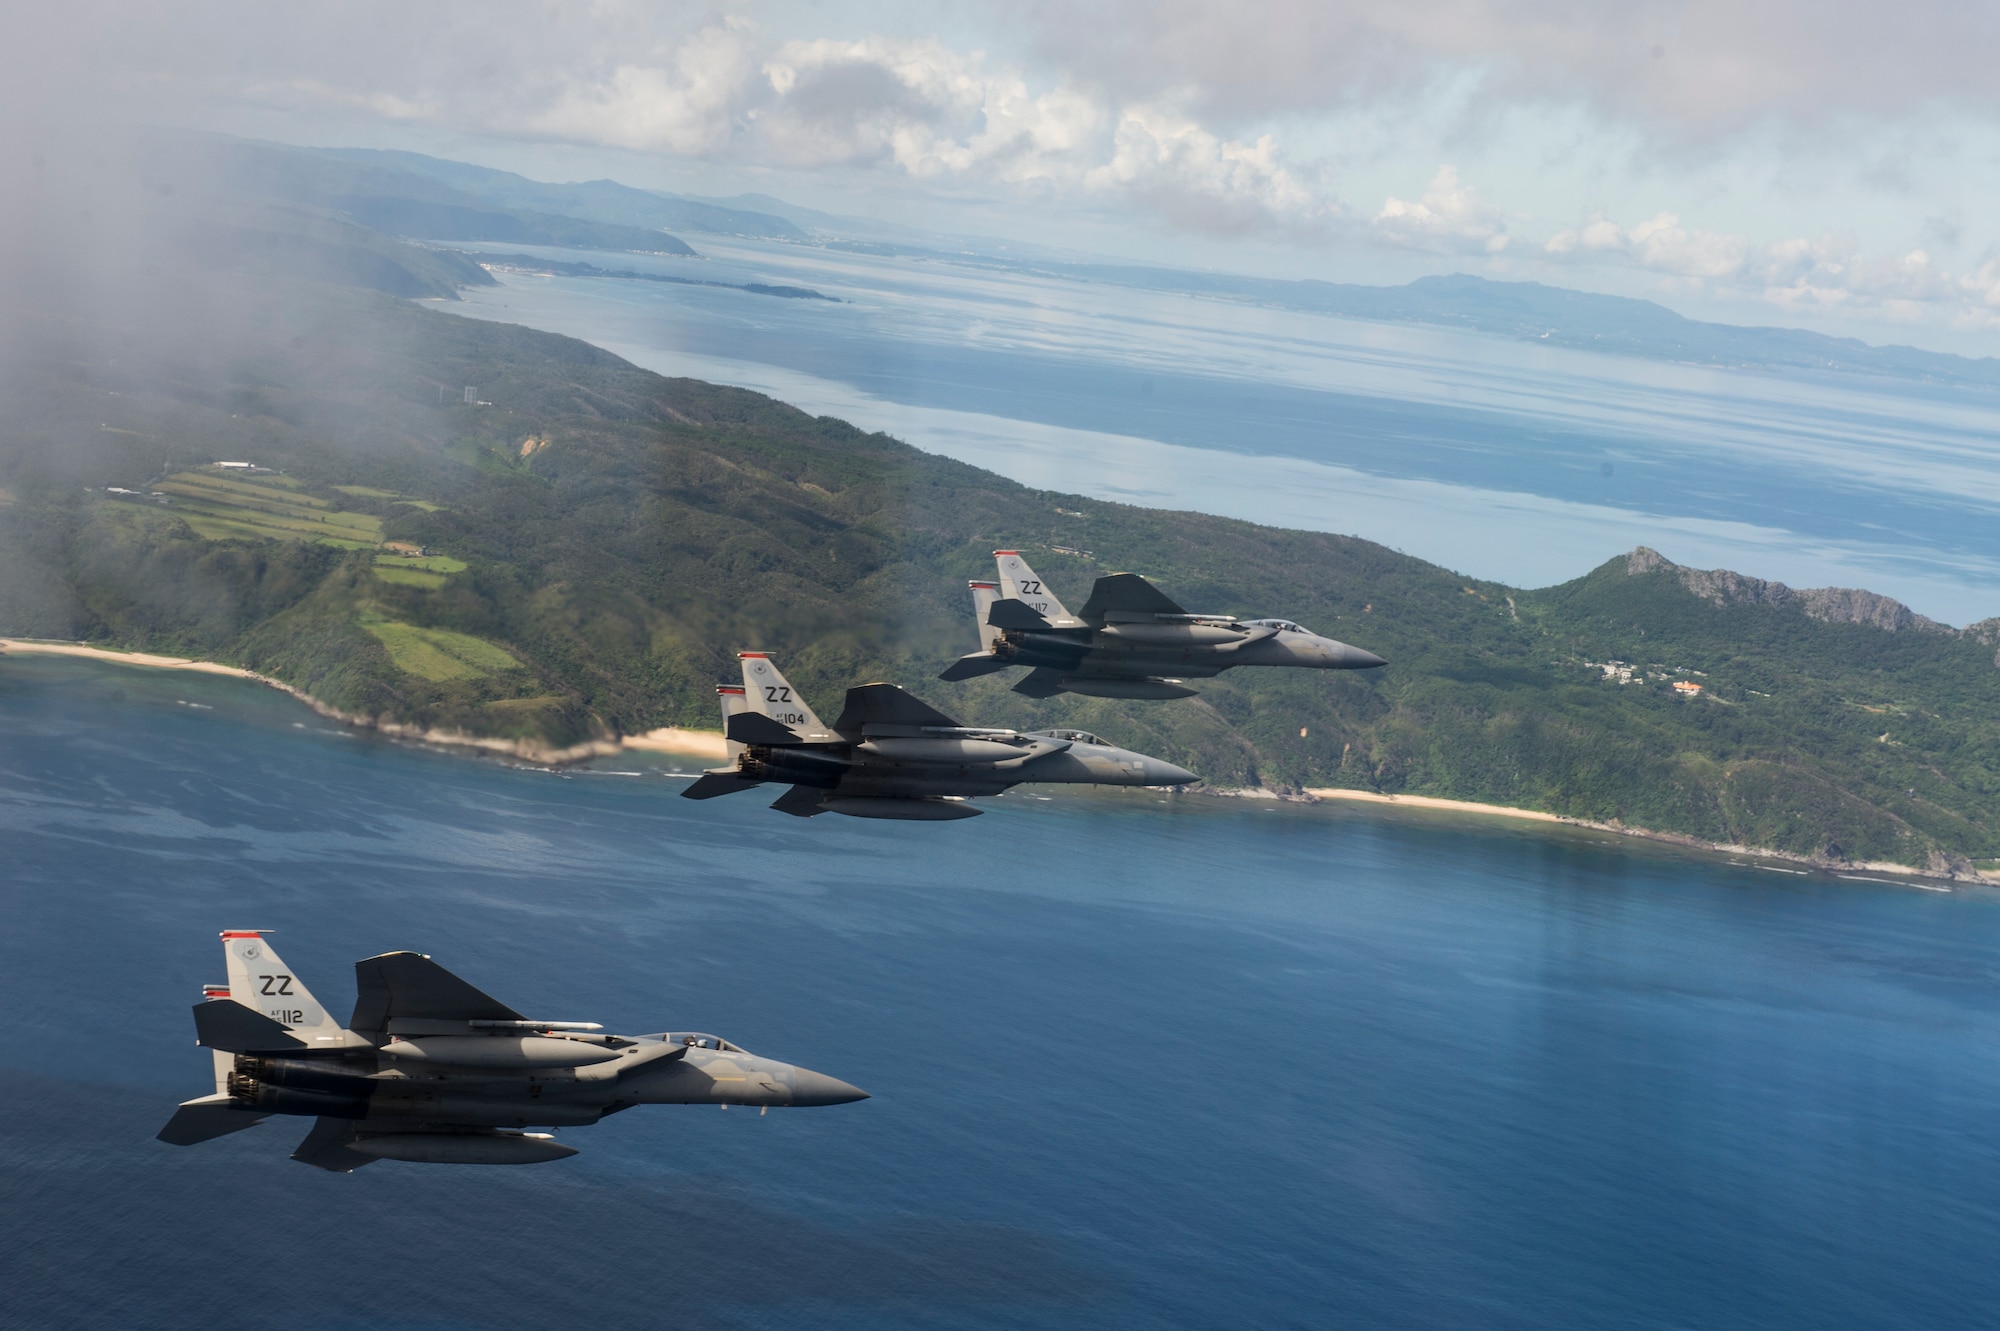 U.S. Air Force F-15 Eagles from the 67th Fighter Squadron fly a training mission over the Pacific Ocean outside of Kadena Air Base, Japan, Aug. 25, 2014. The 67th FS has been a part of Kadena's team since March 15, 1971, and provides air defense and air superiority in the Asian-Western Pacific area of operations. (U.S. Air Force photo by Staff Sgt. Stephany Richards/Released)